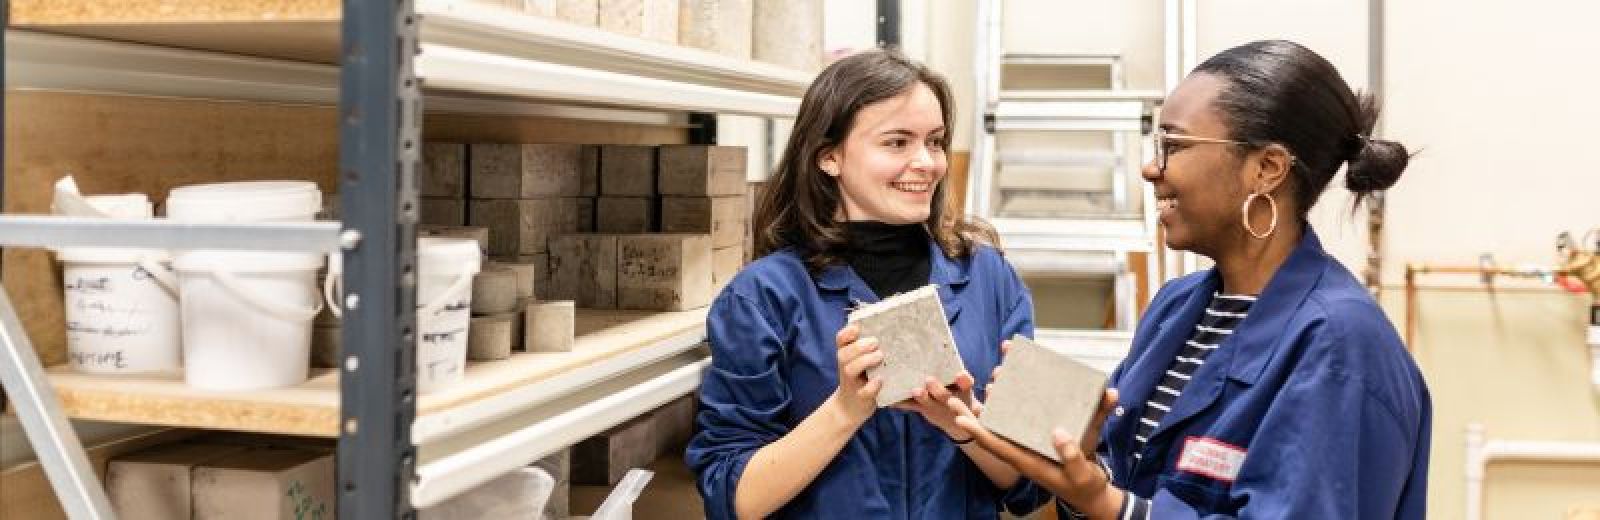 Image of two female students holding concrete in the civil engineering lab at the university of leeds.